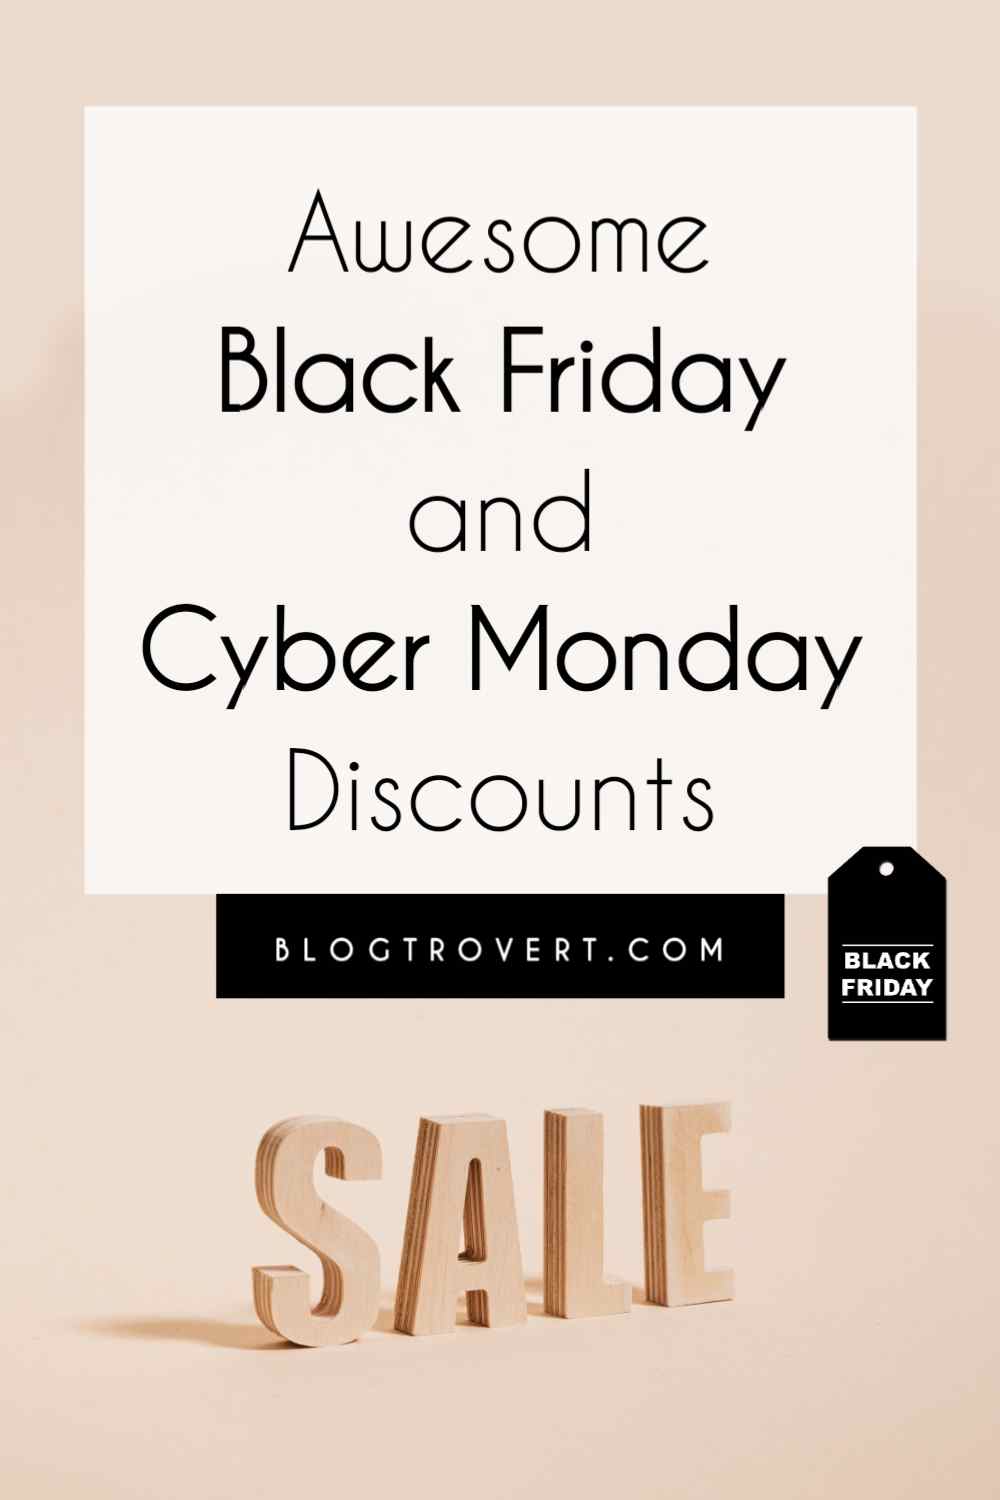 Awesome Black Friday and Cyber Monday Deals For Bloggers and Creatives 5